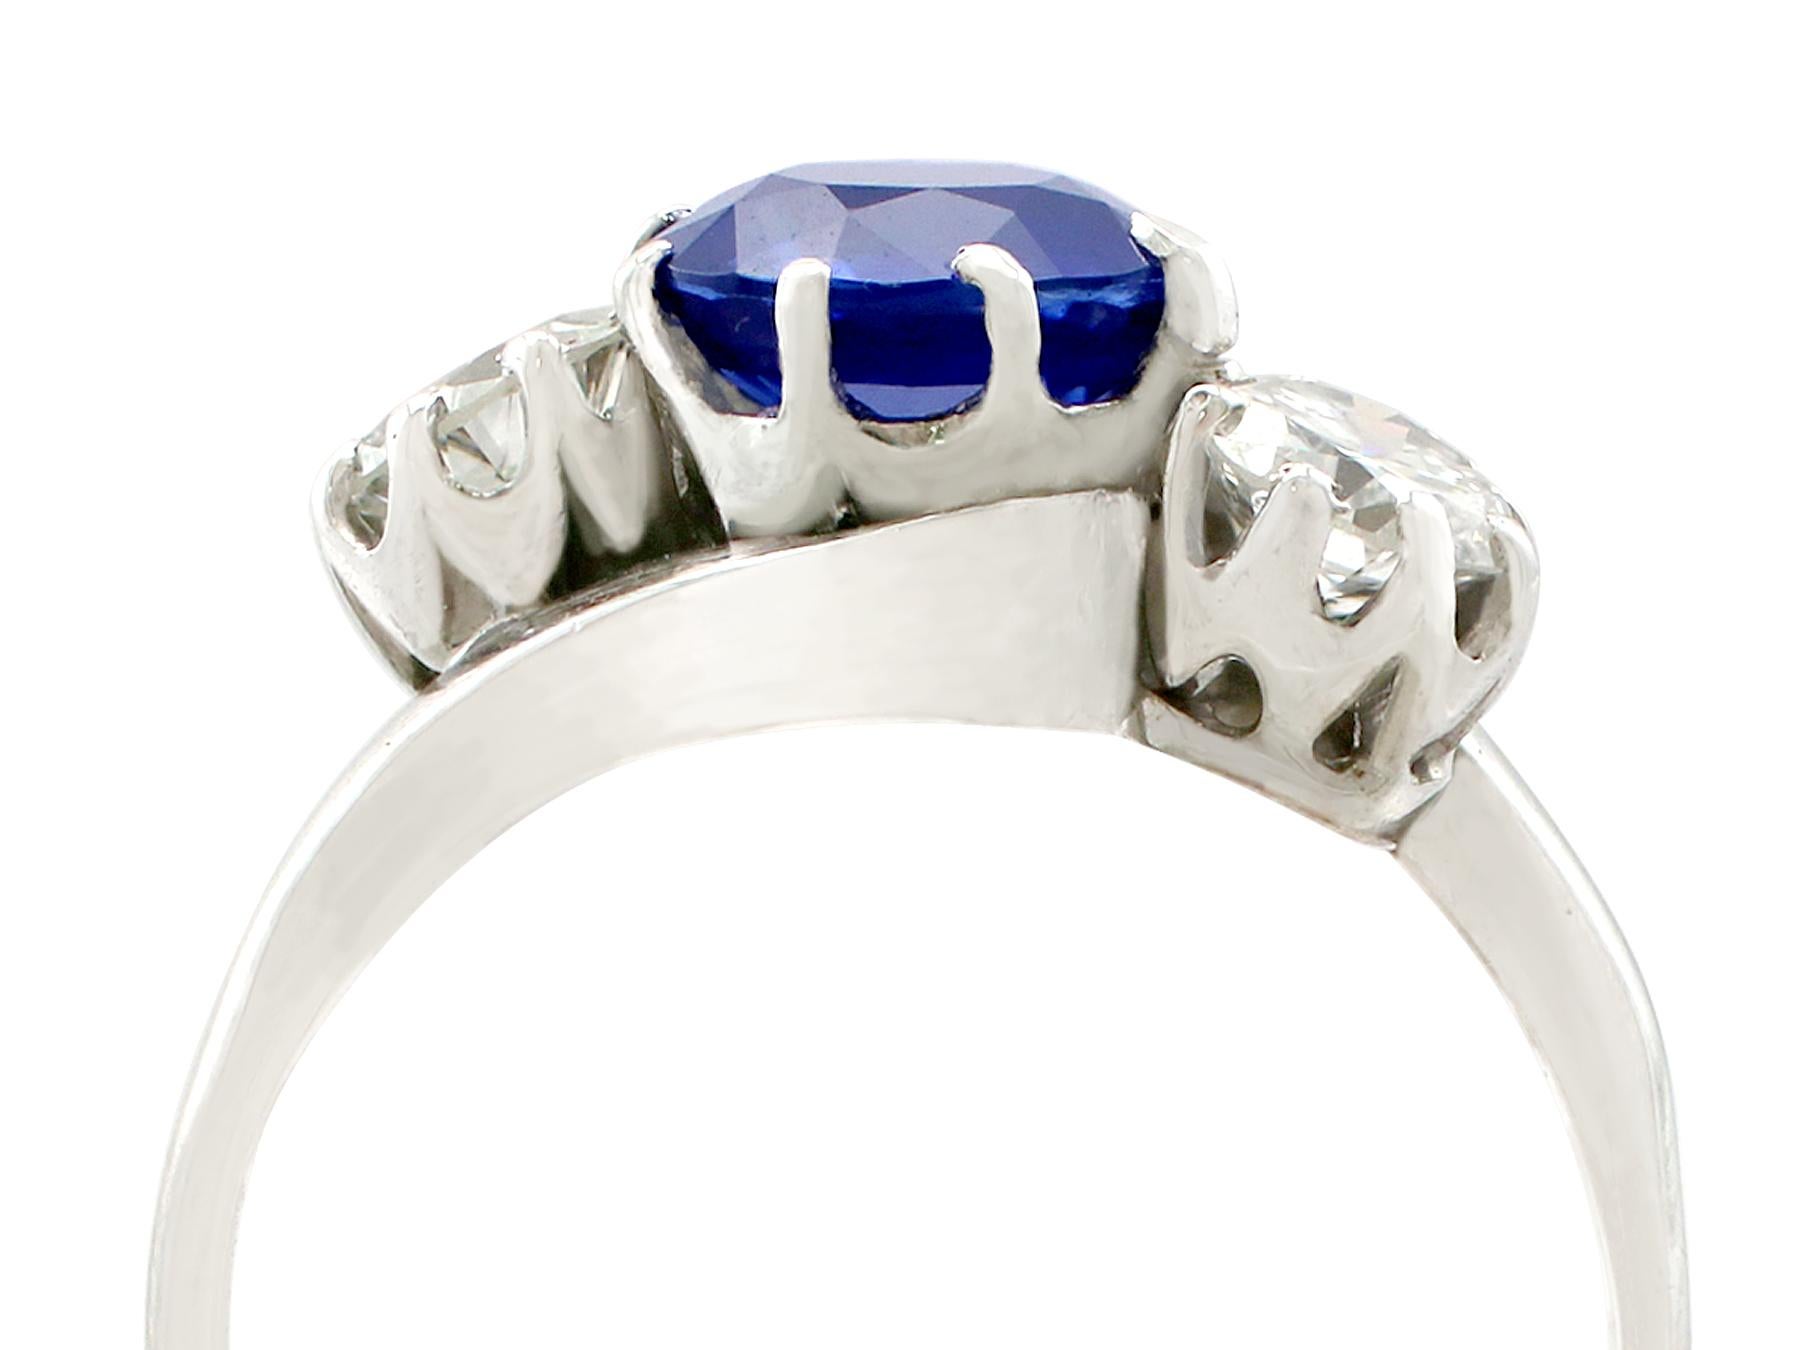 An impressive 1.39 carat sapphire and 0.80 carat diamond, 18 carat white gold twist ring; part of our diverse gemstone and estate jewelry collections.

This fine and impressive sapphire and diamond trilogy ring has been crafted in 18k white